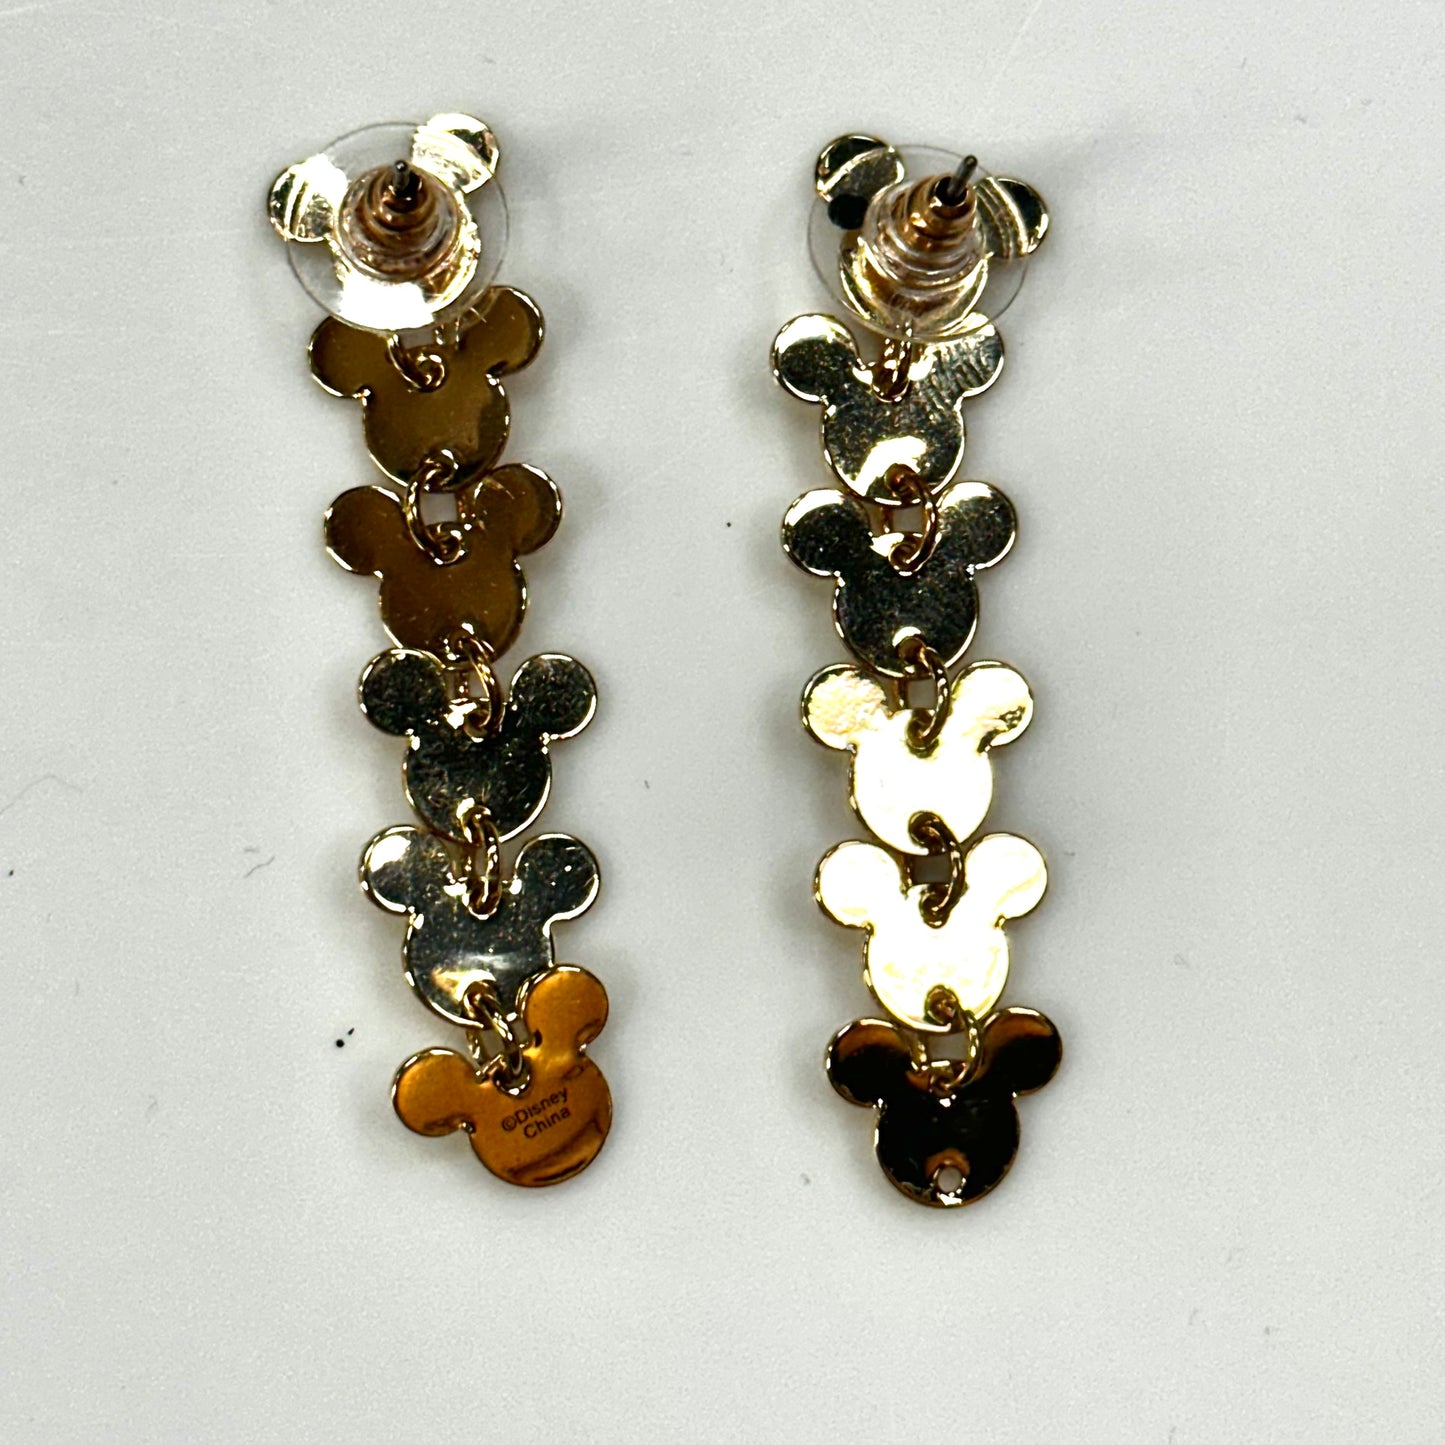 Earrings Other By Disney Store